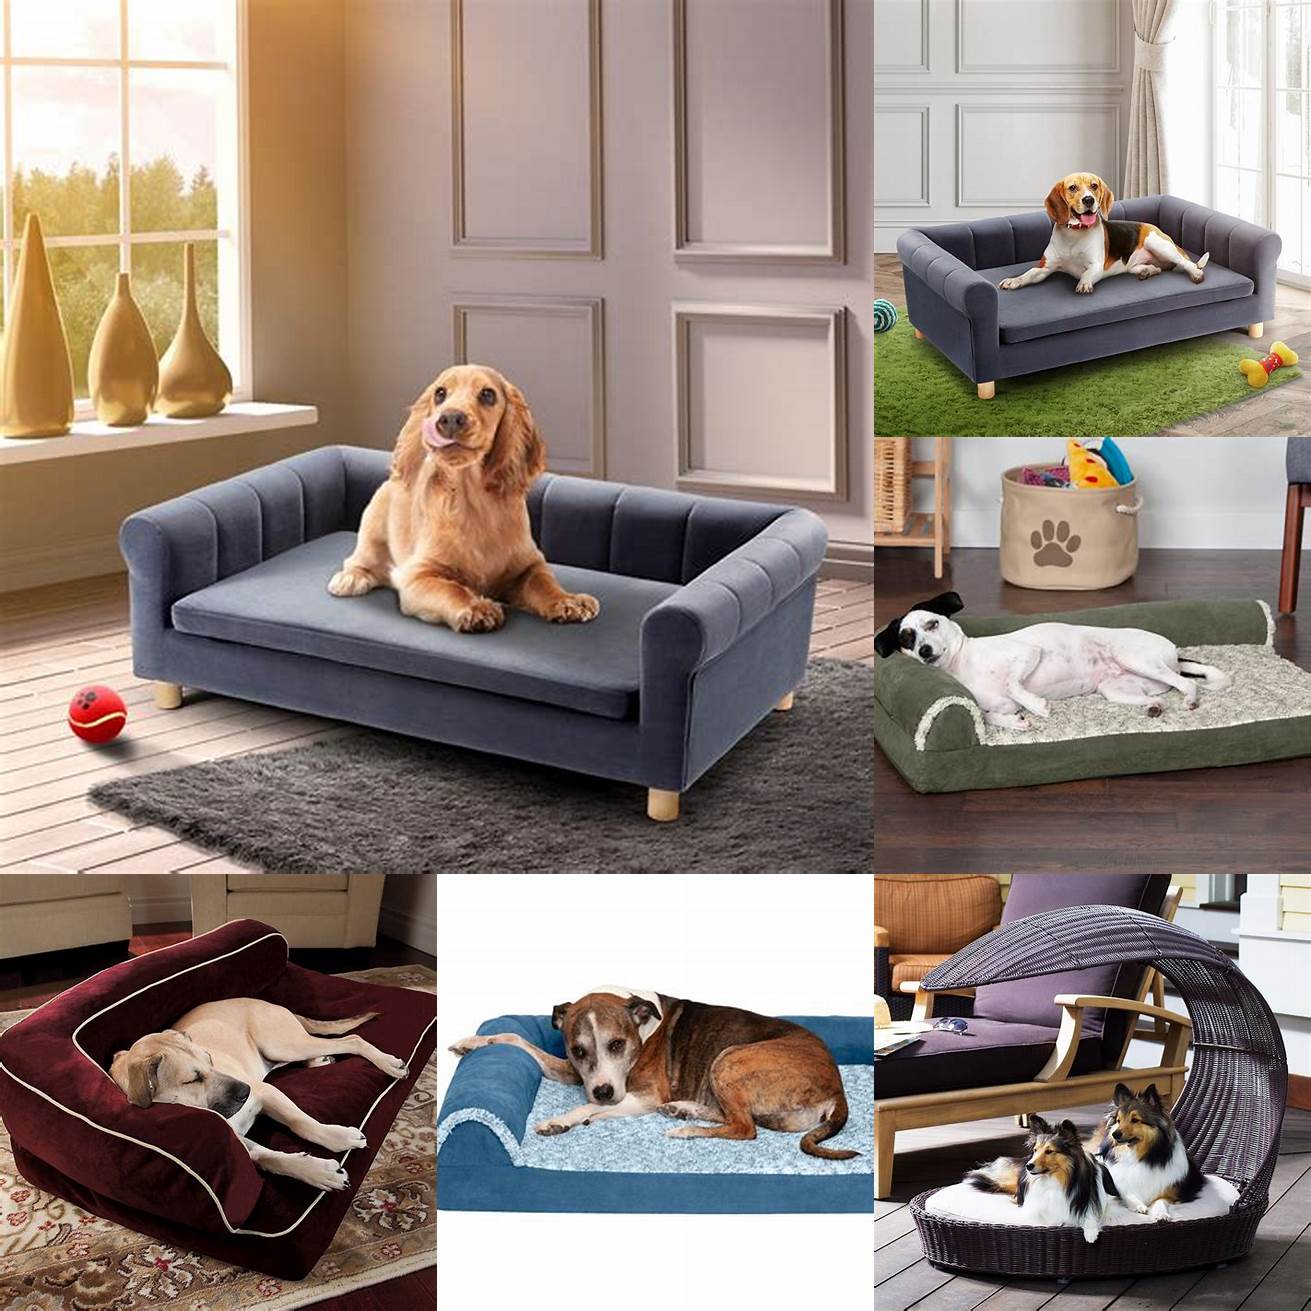 Chaise Lounge Dog Bed